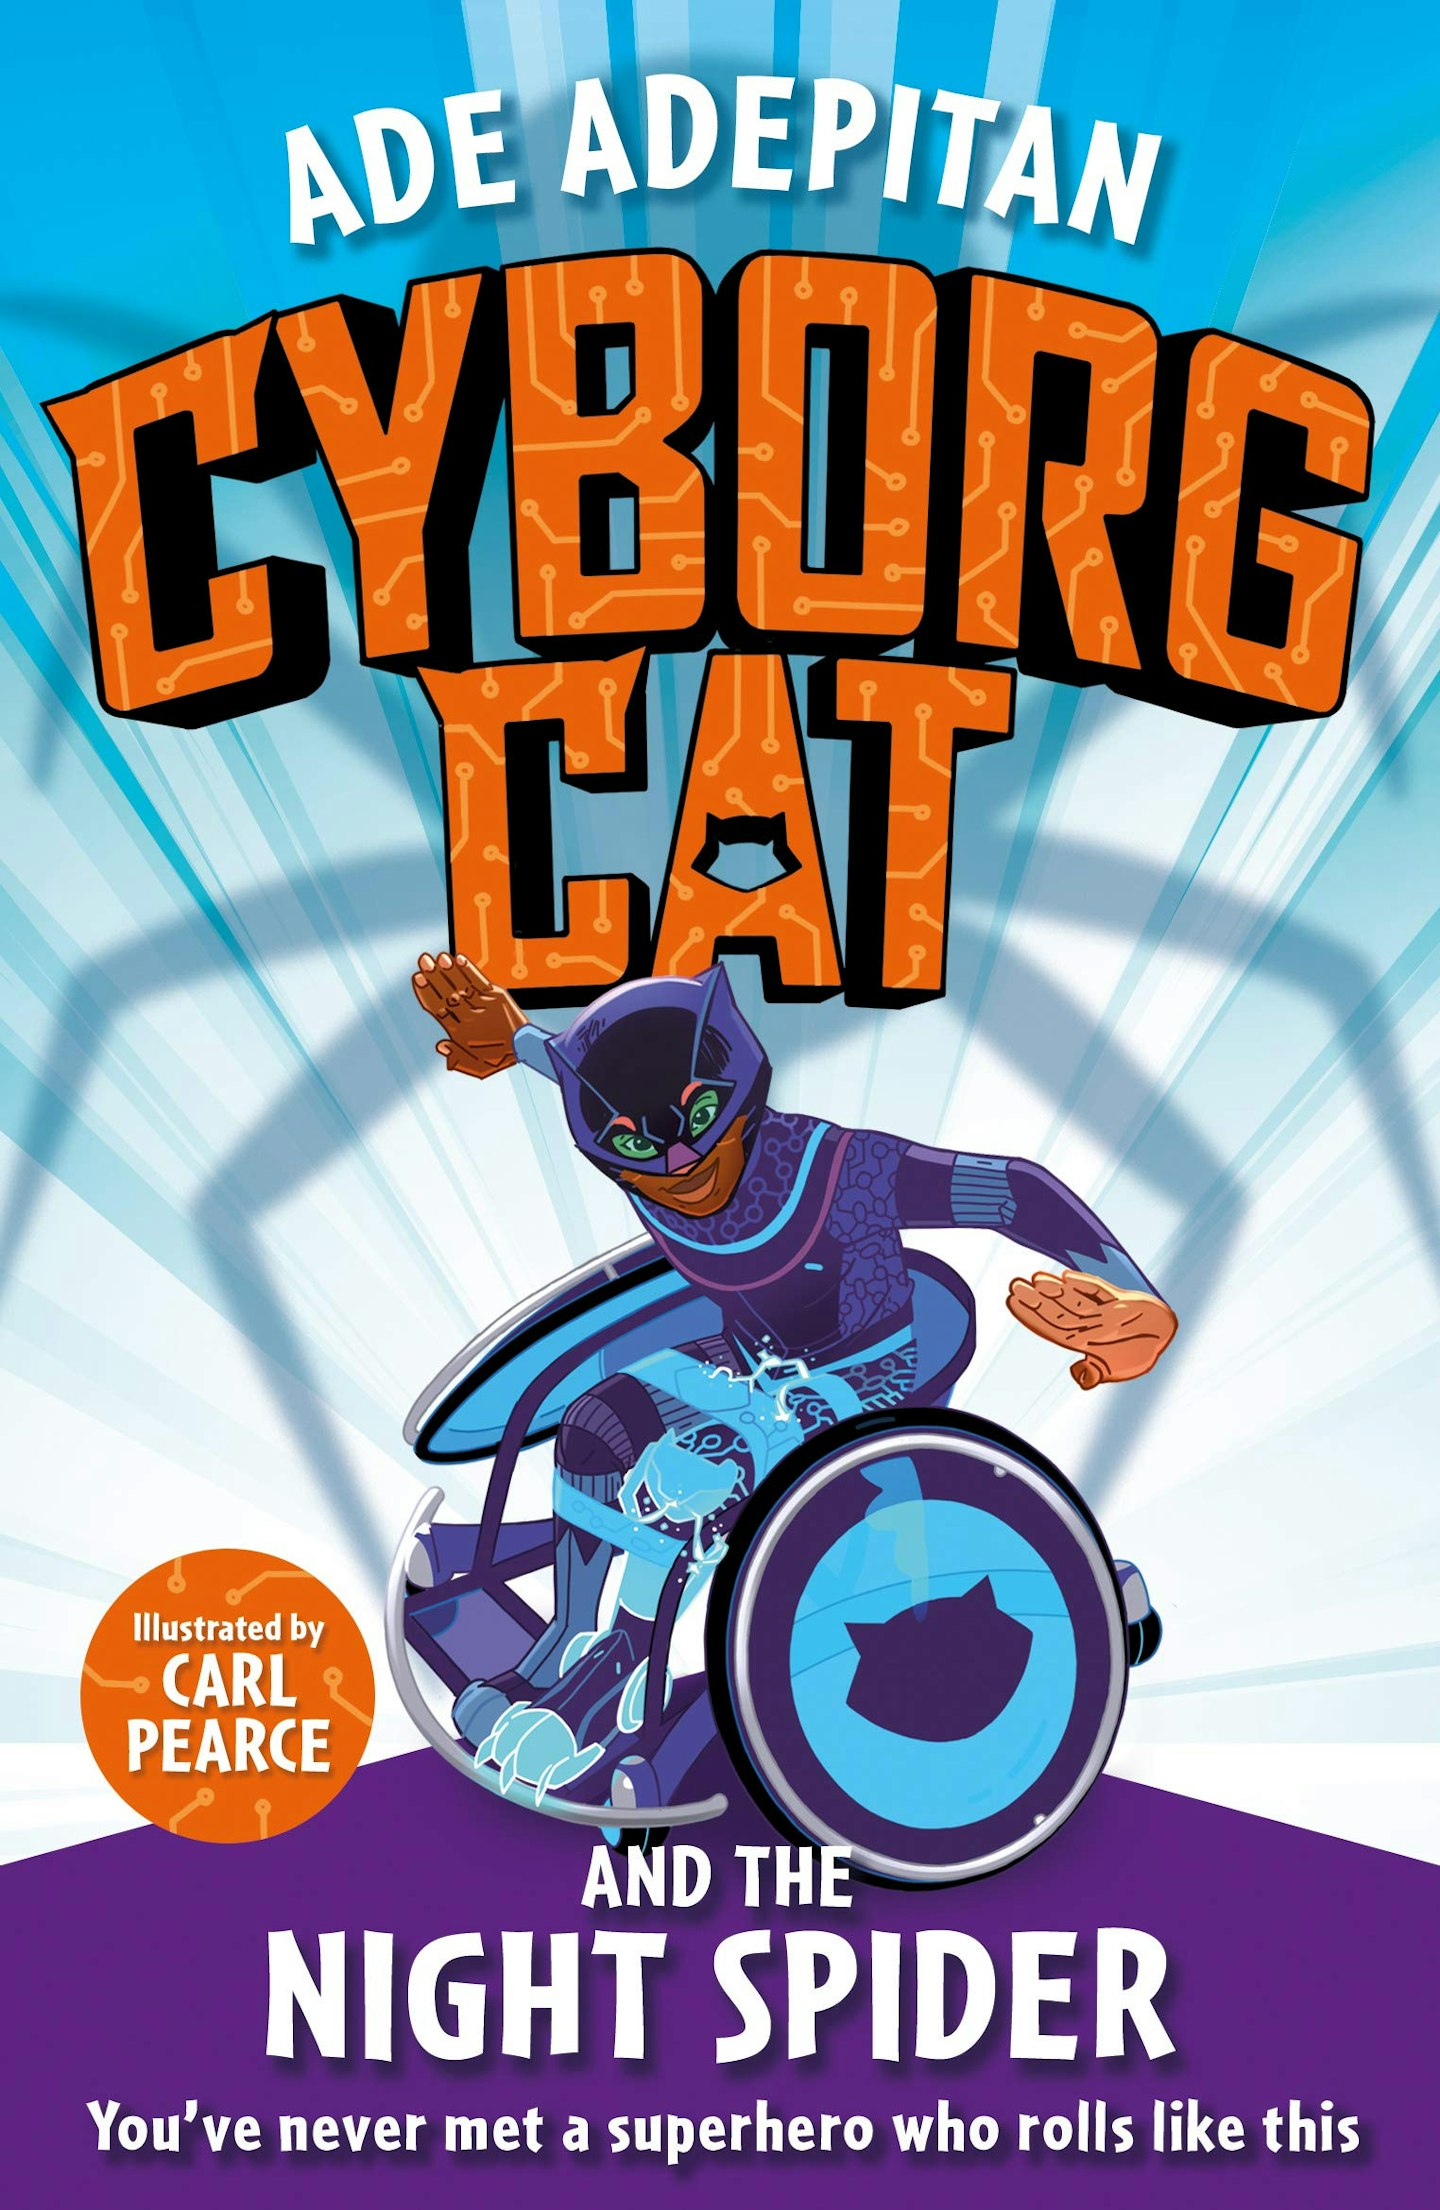 Cyborg Cat and the Night Spider by Ade Adepitan, 5.39